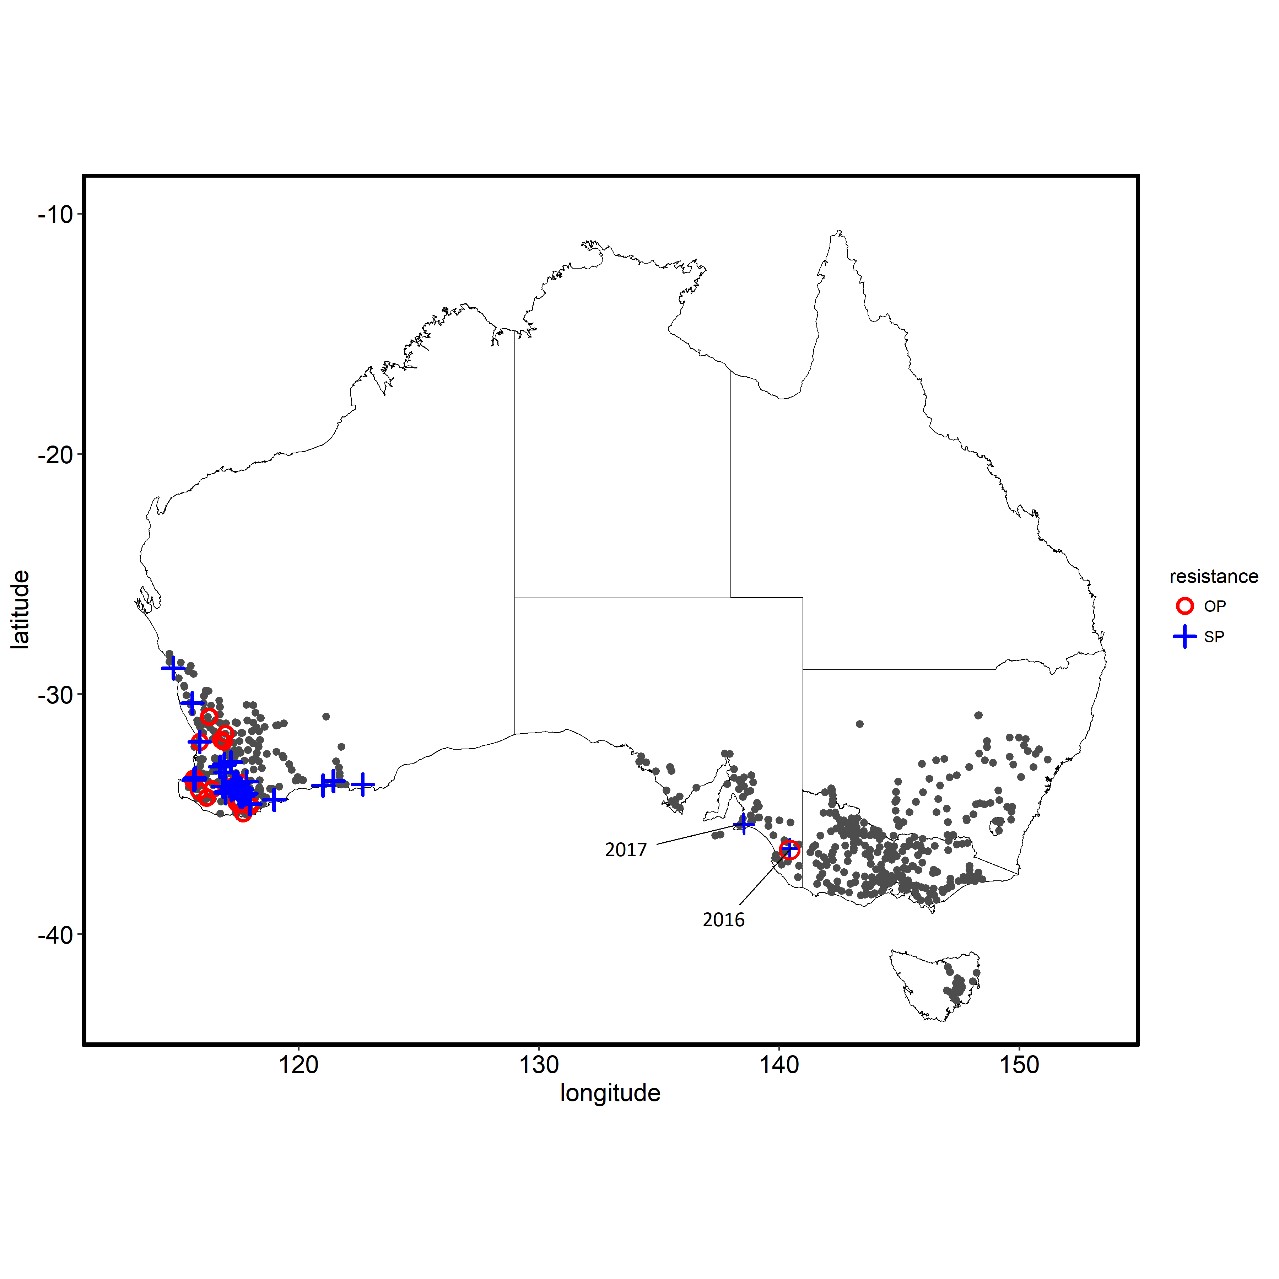 In 2016, following reports of a field control failure in the Upper South East district in South Australia (SA), resistance testing determined this SA population was resistant to SPs and OPs. In 2017, two additional SP resistant populations were confirmed on the Fleurieu Peninsula (approx. 30km apart from each other, and approx. 200km from the 2016 detection).